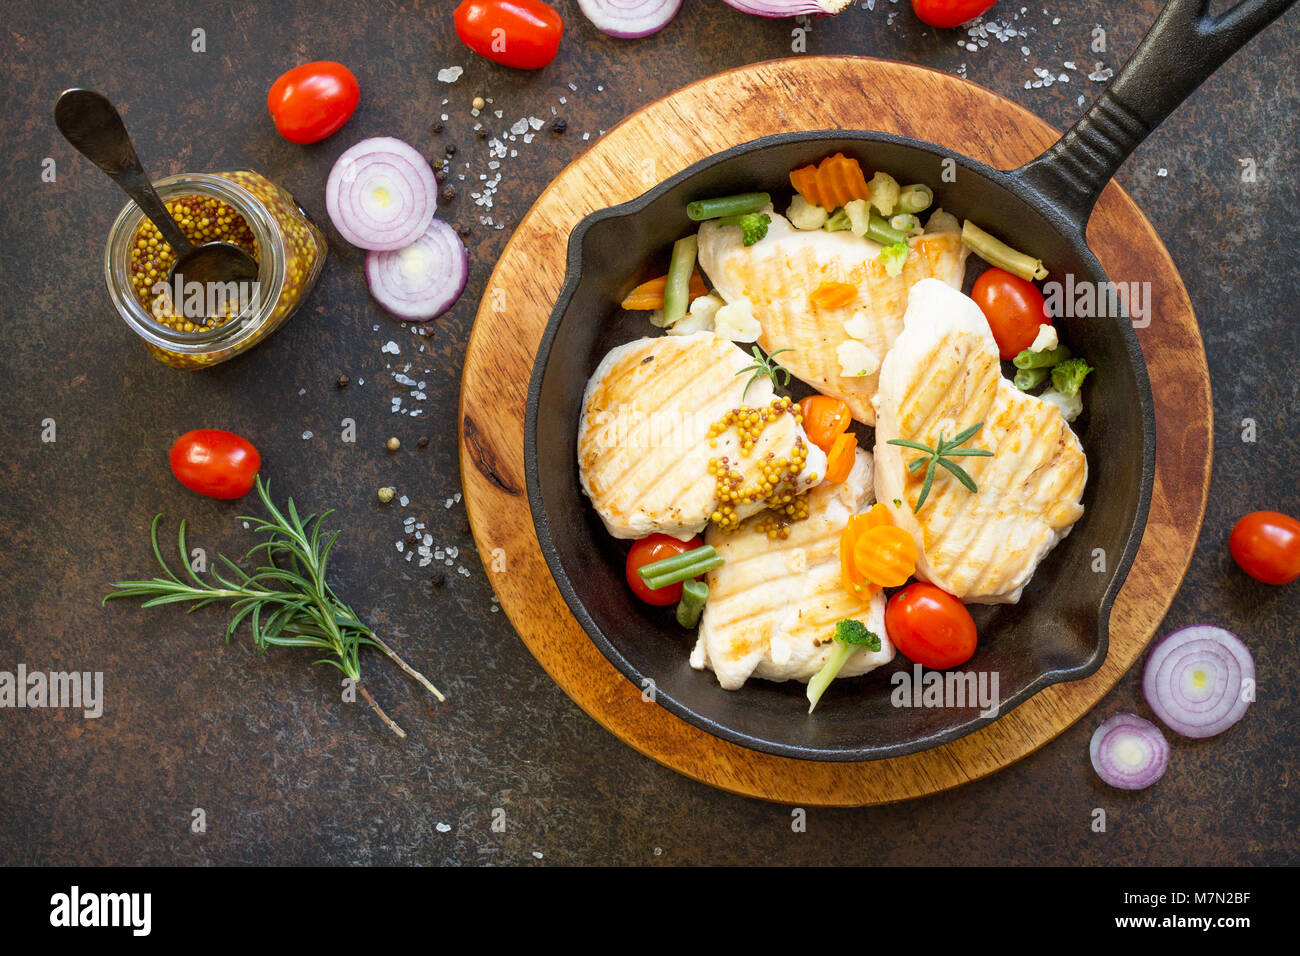 Grilled chicken fillet and various vegetables on a cast-iron frying pan. Copy space, top view flat lay background. Stock Photo